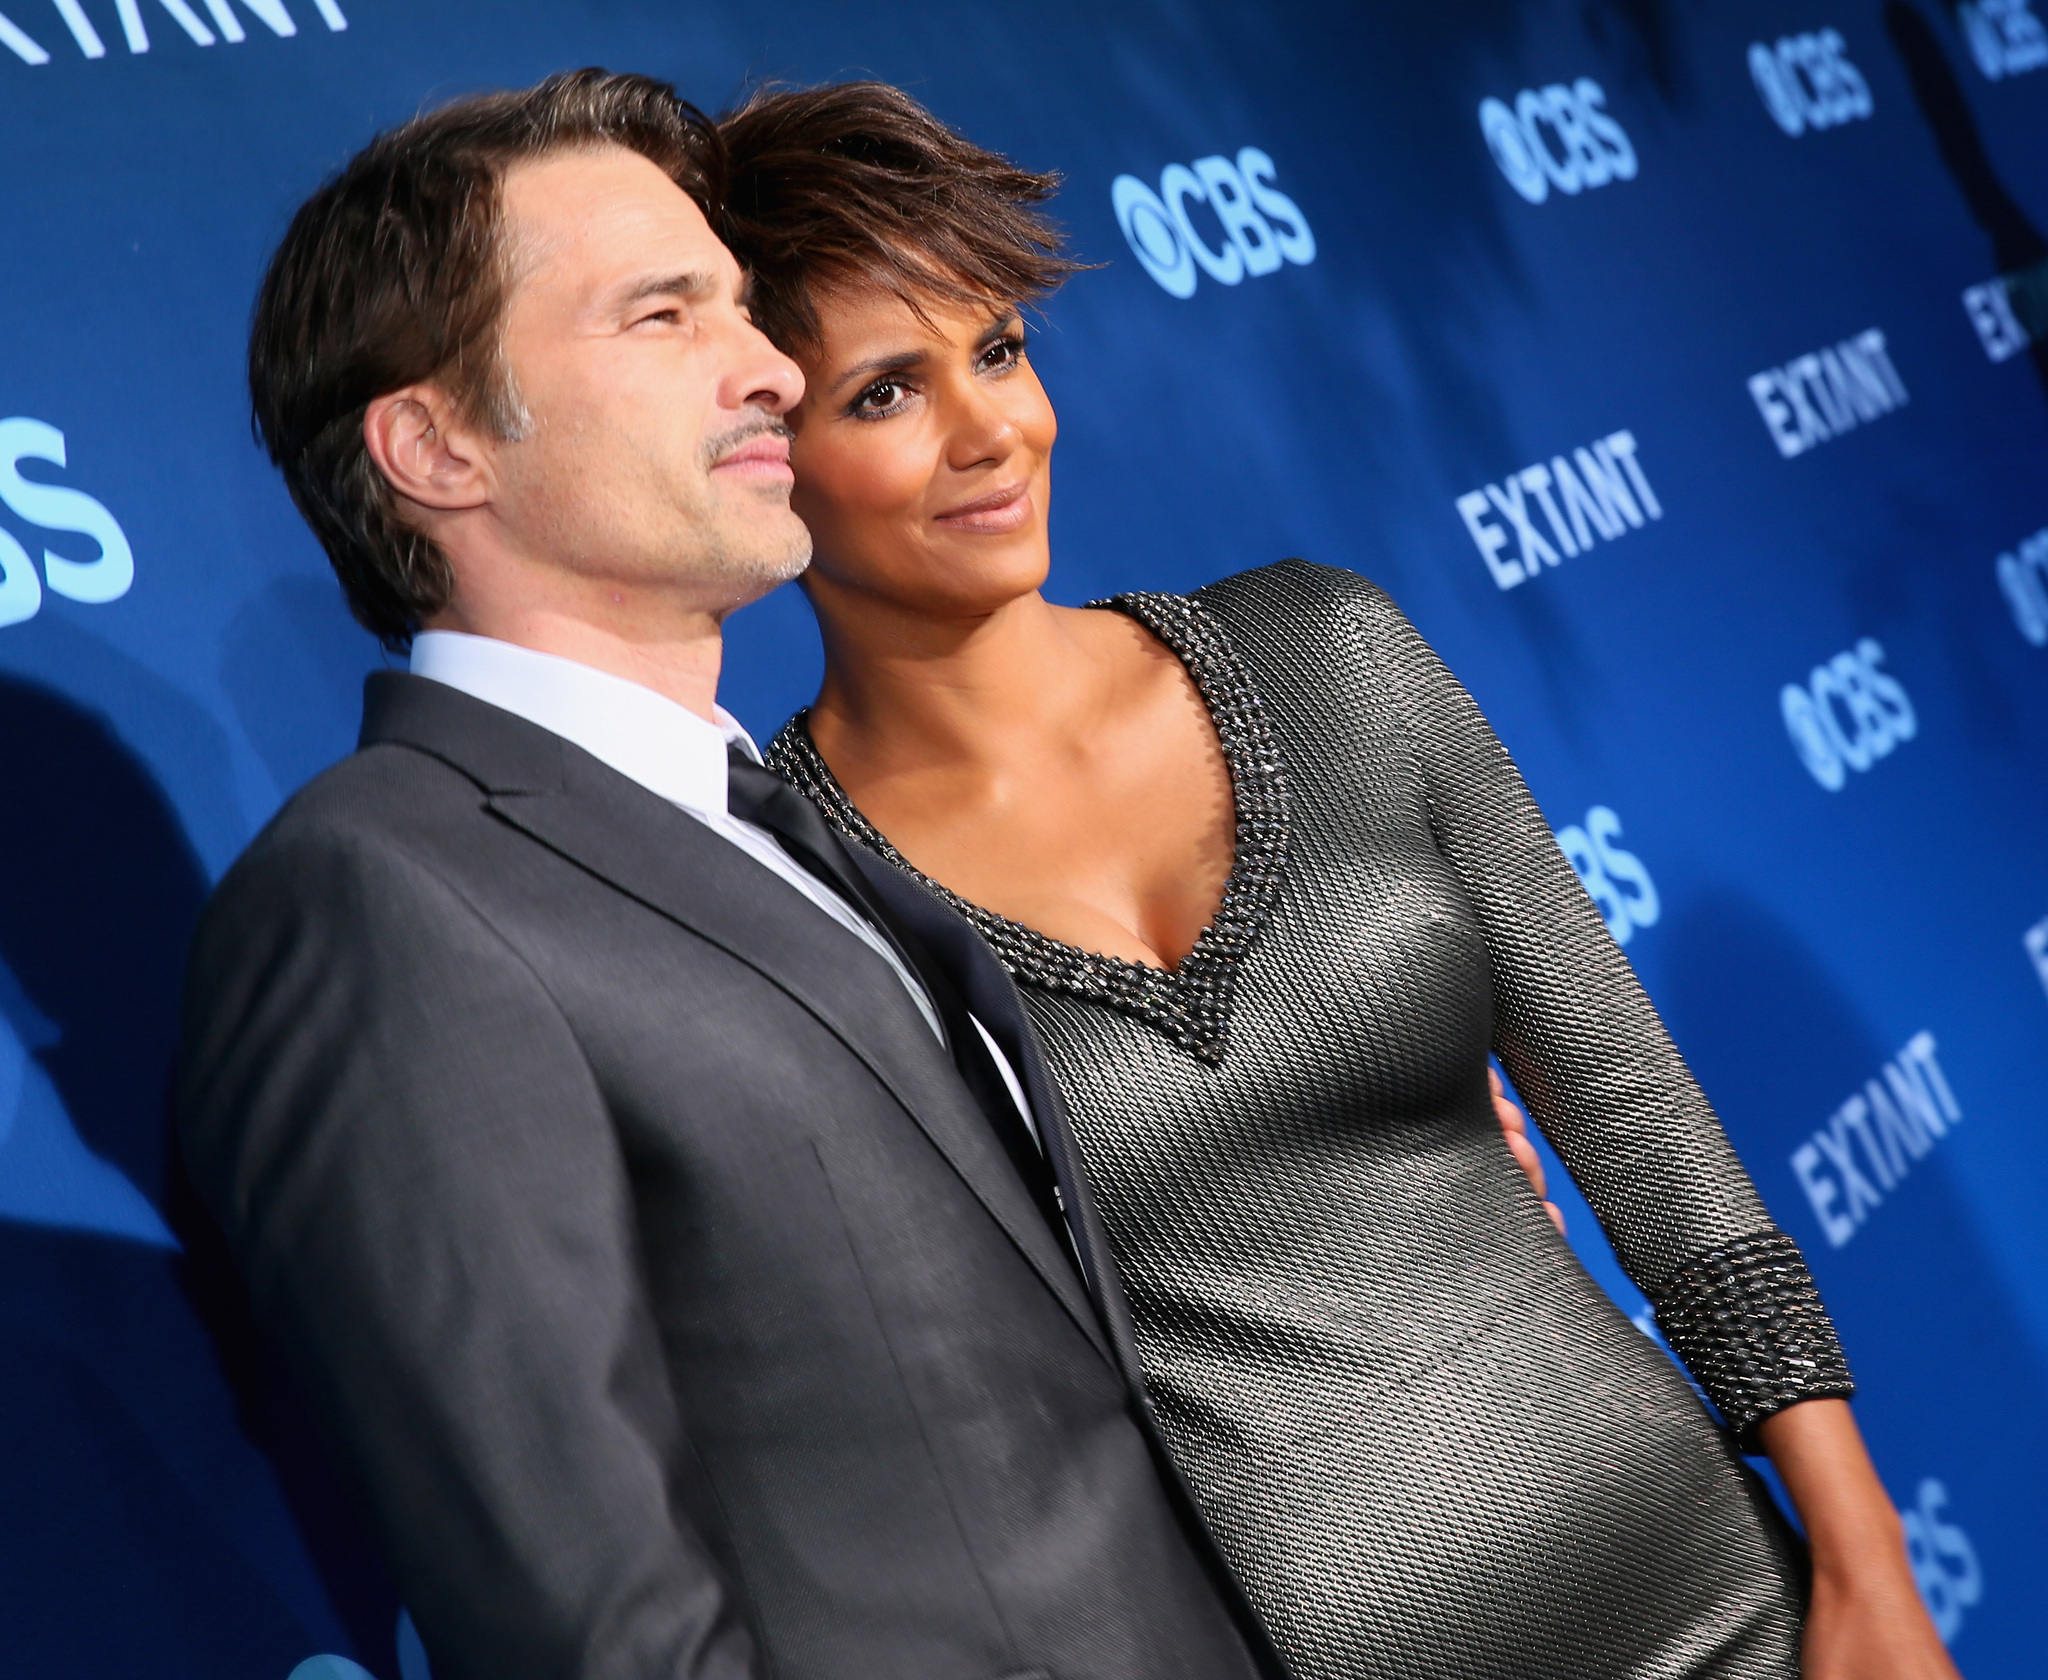 Halle Berry and Olivier Martinez at event of Extant (2014)